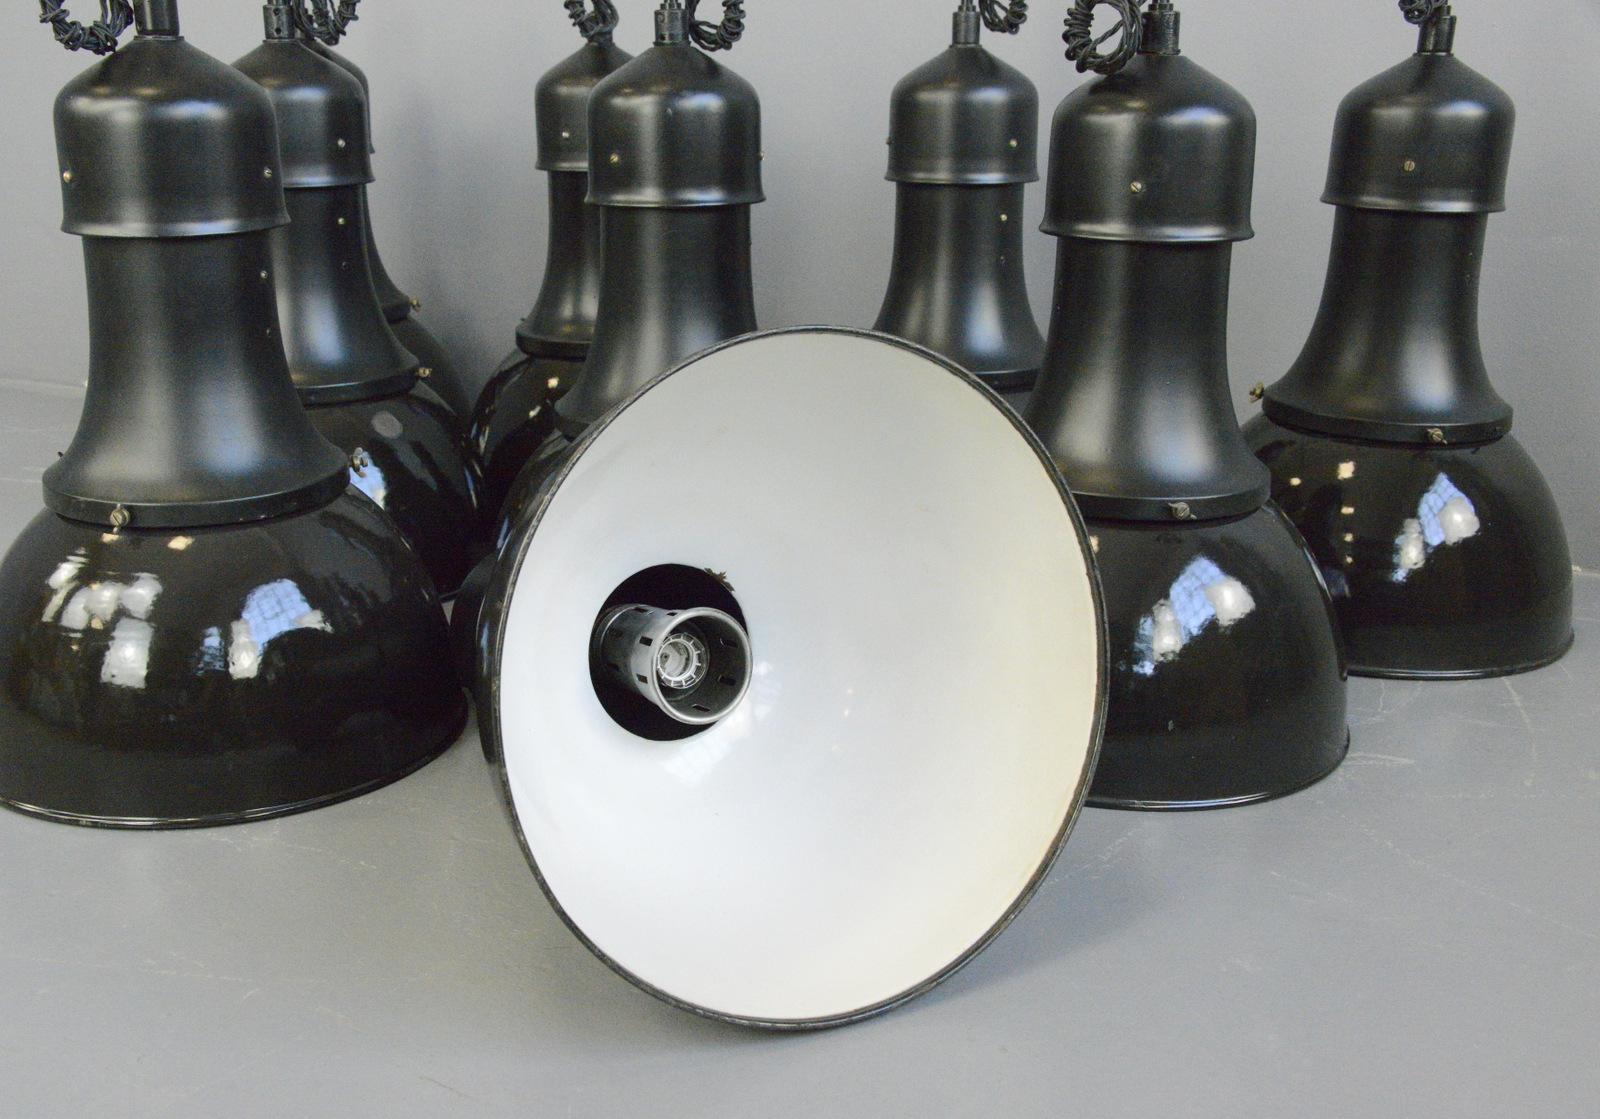 Model 530 Bauhaus Pendant Lights by Kandem, Circa 1920s In Good Condition For Sale In Gloucester, GB